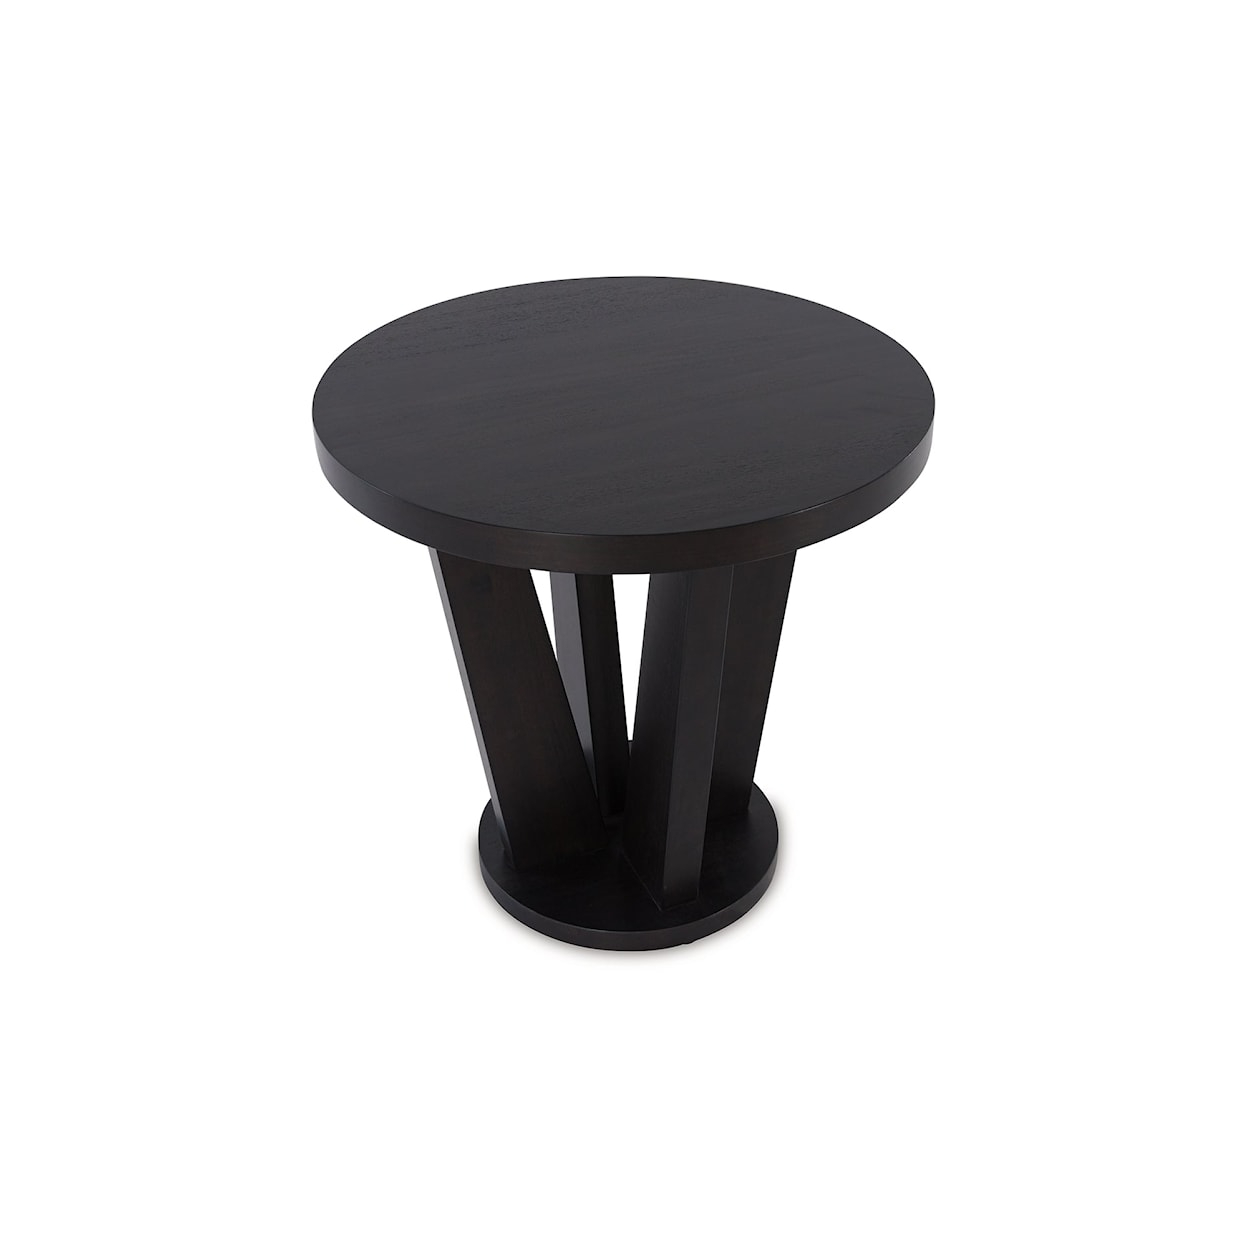 Ashley Furniture Signature Design Chasinfield Round End Table